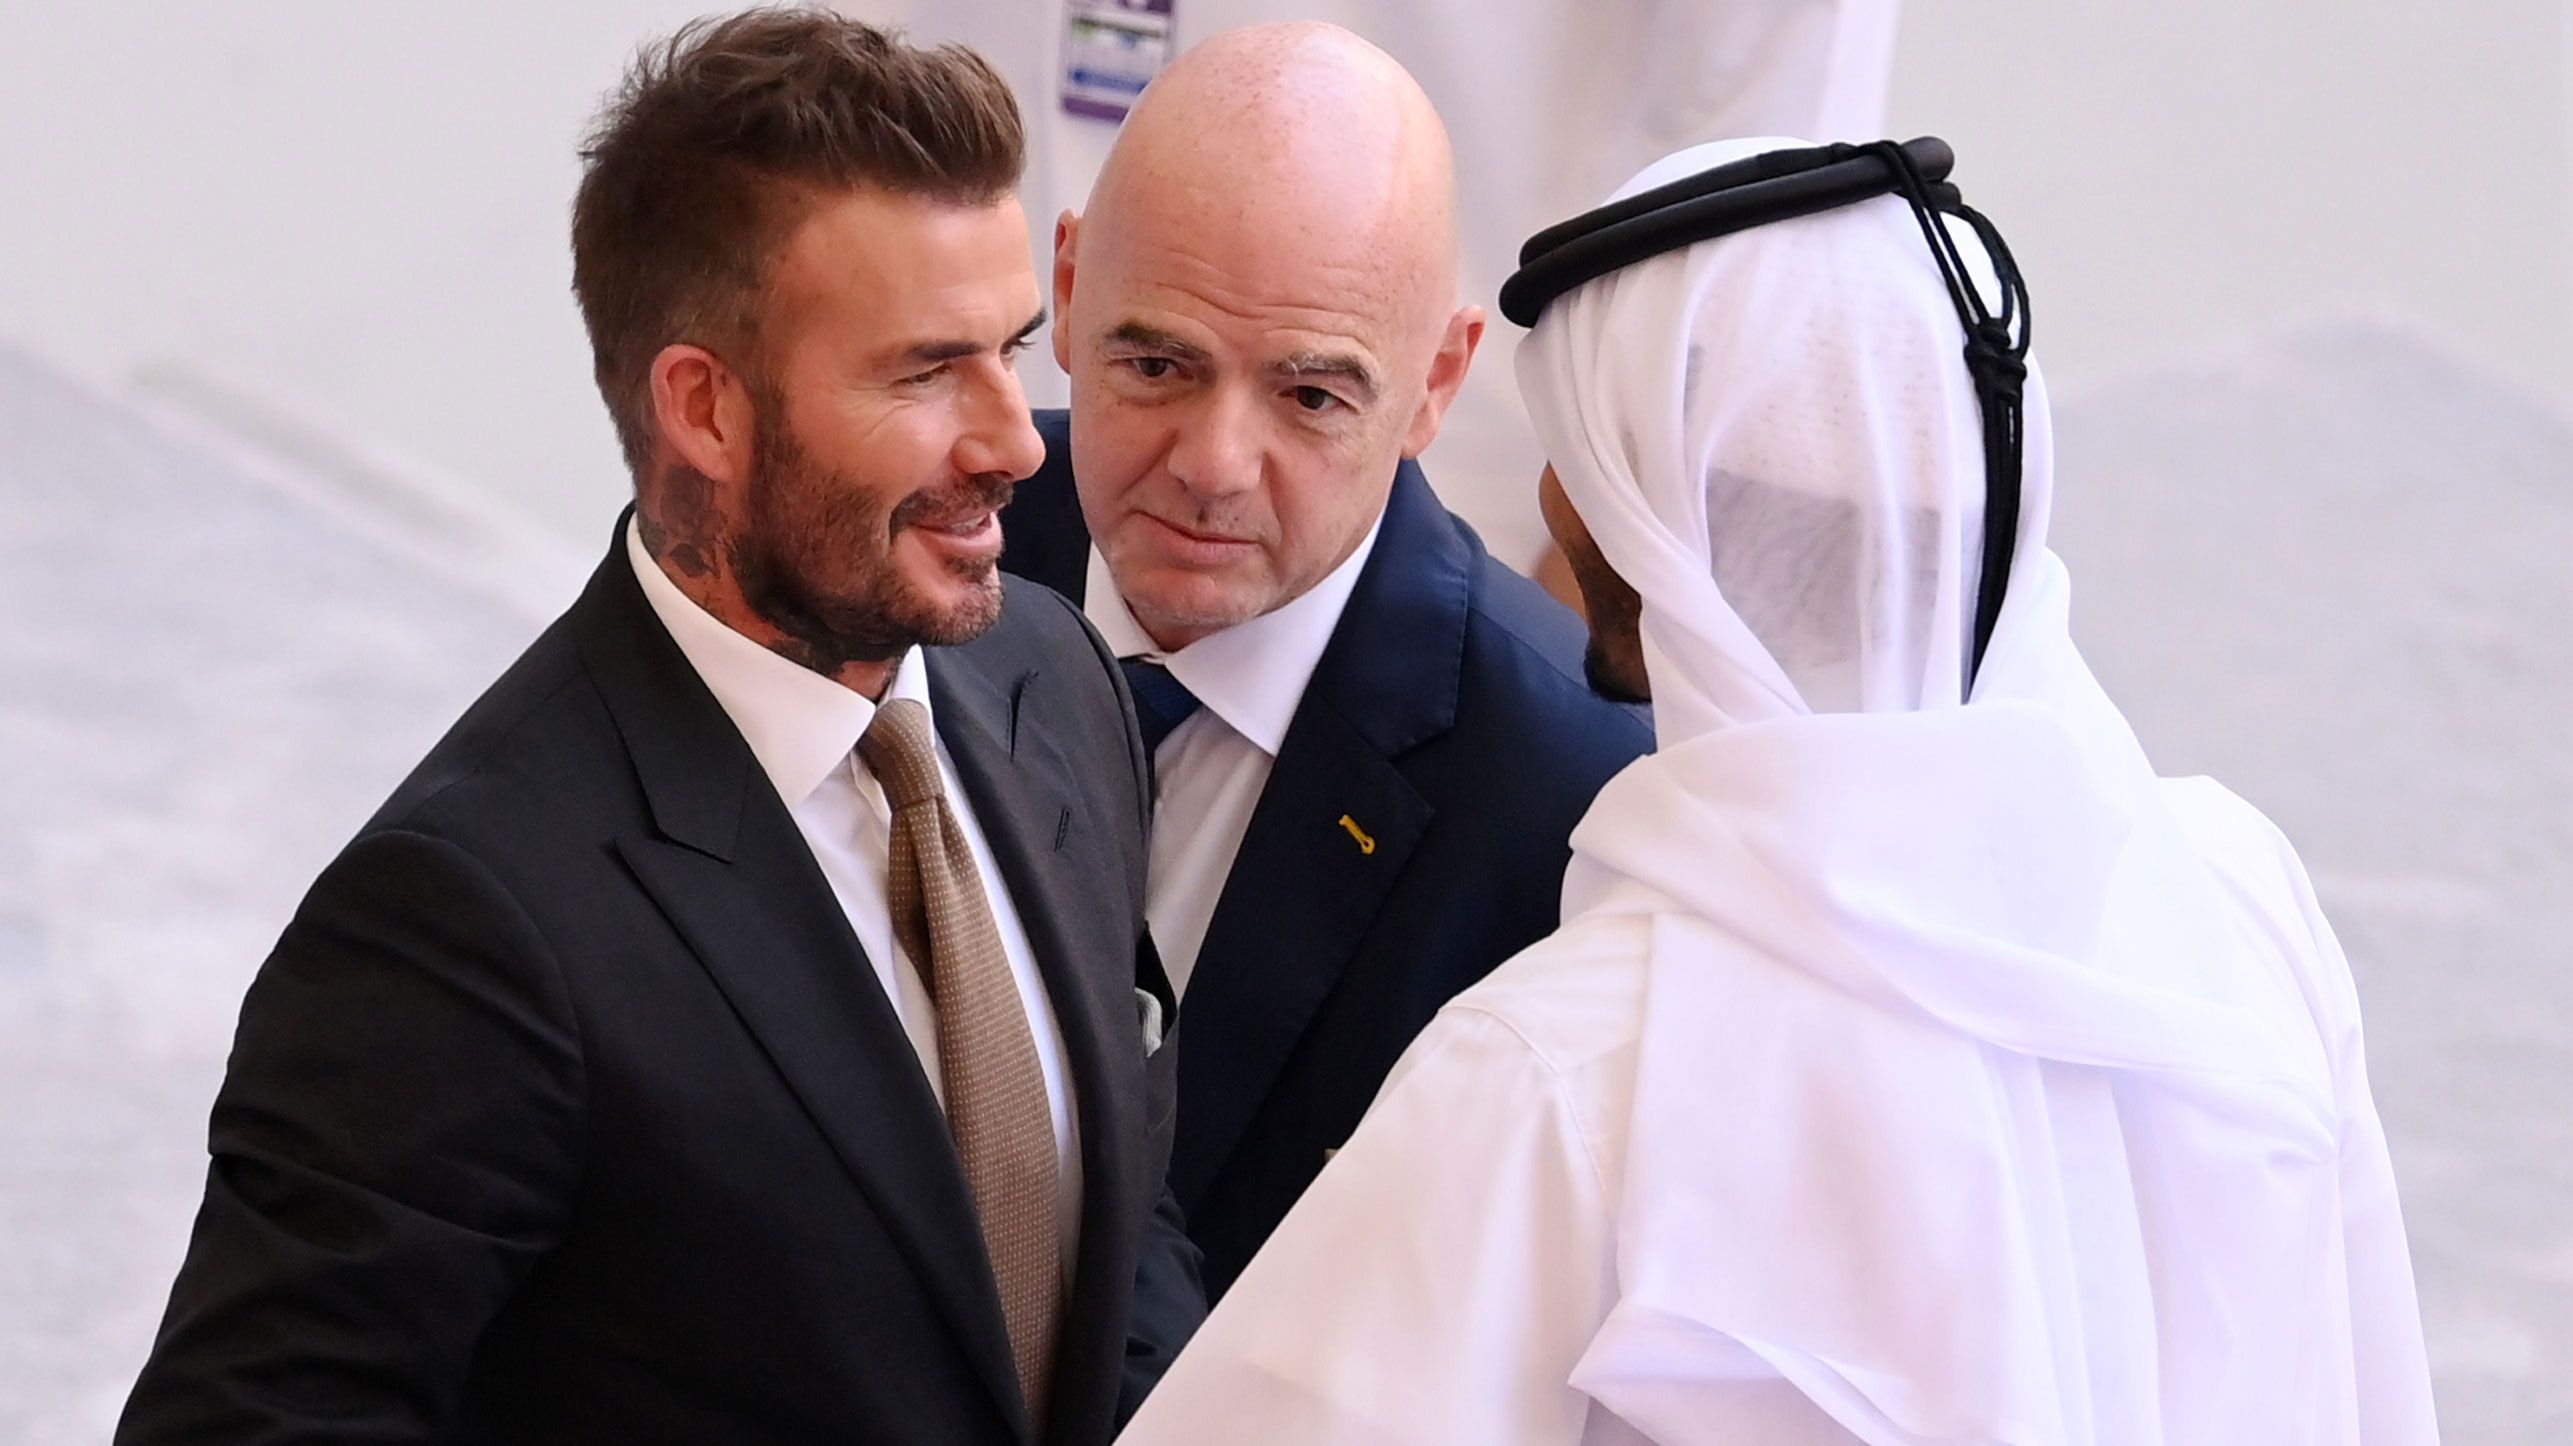 FIFA President Gianni Infantino (c) and former England player David Beckham (l) are seen in the stands prior to the Qatar FIFA World Cup Group B match between England and Iran.